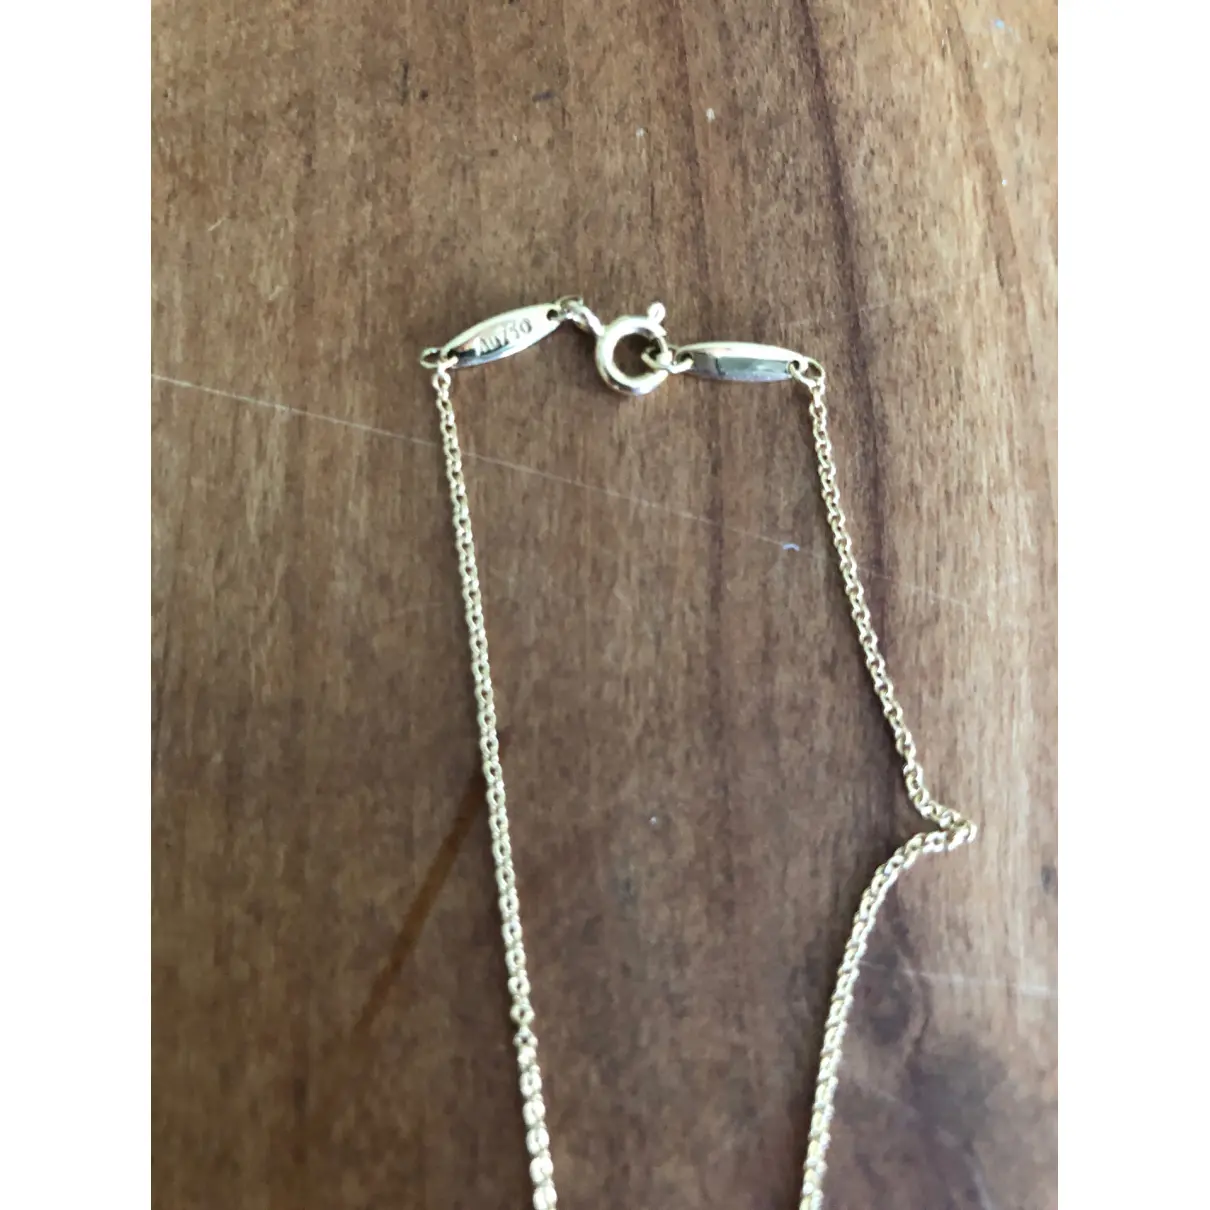 Buy Tiffany & Co Elsa Peretti yellow gold long necklace online